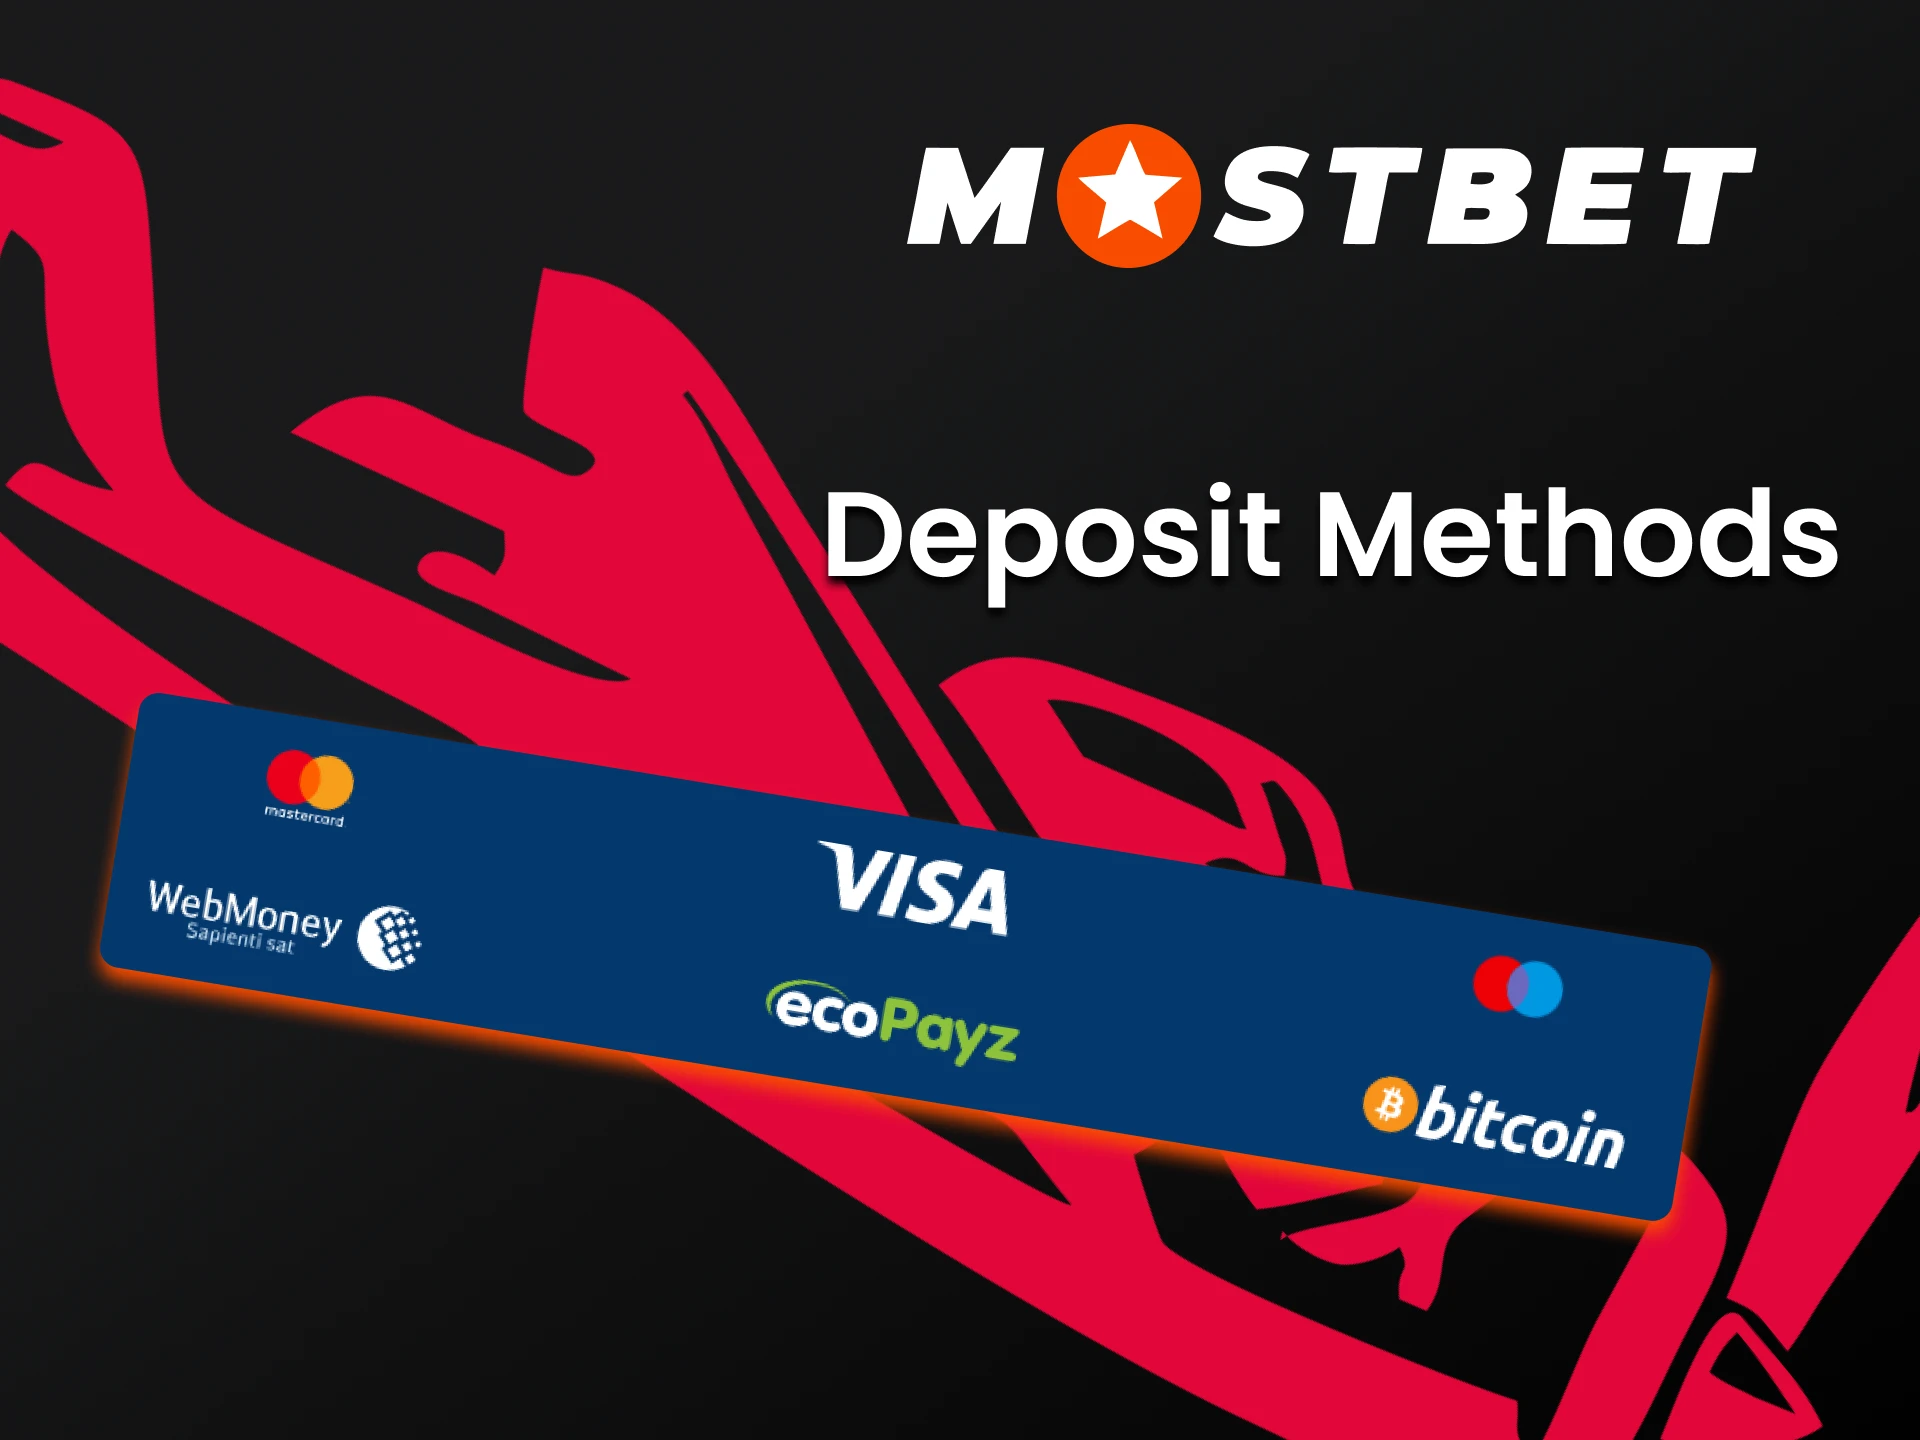 To win real money, you need to make a deposit on Mostbet.